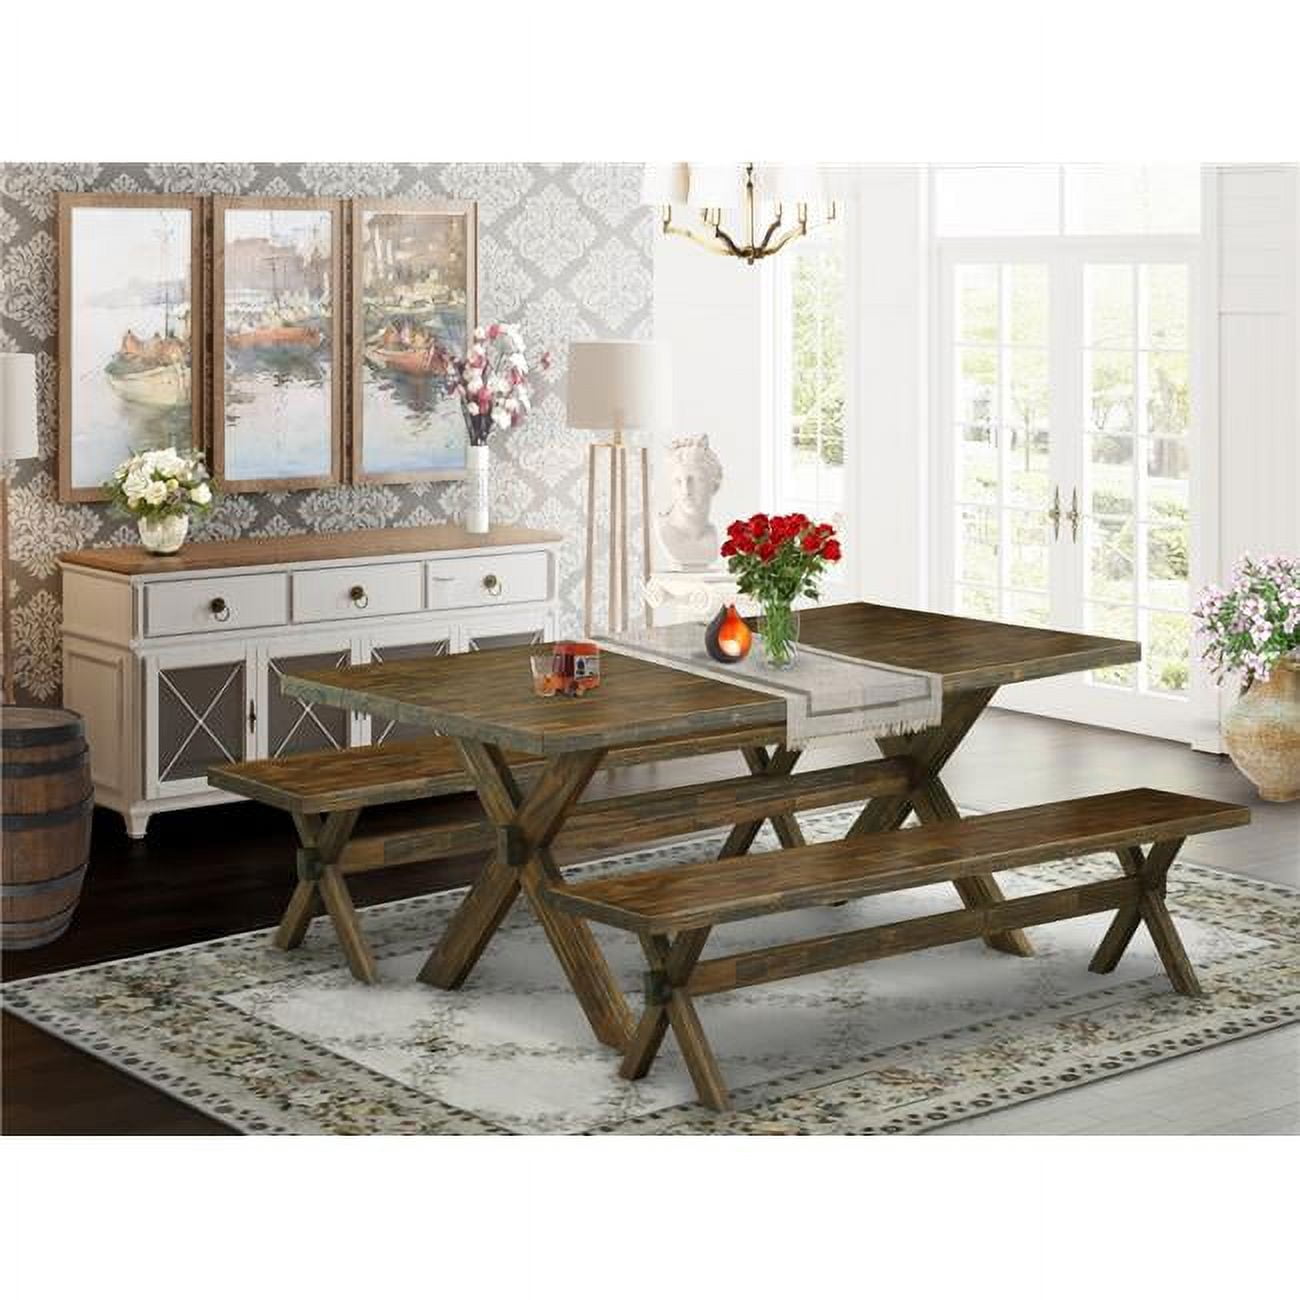 Shop 10 small dining table rooms sets at Wayfair, Lowe's and more